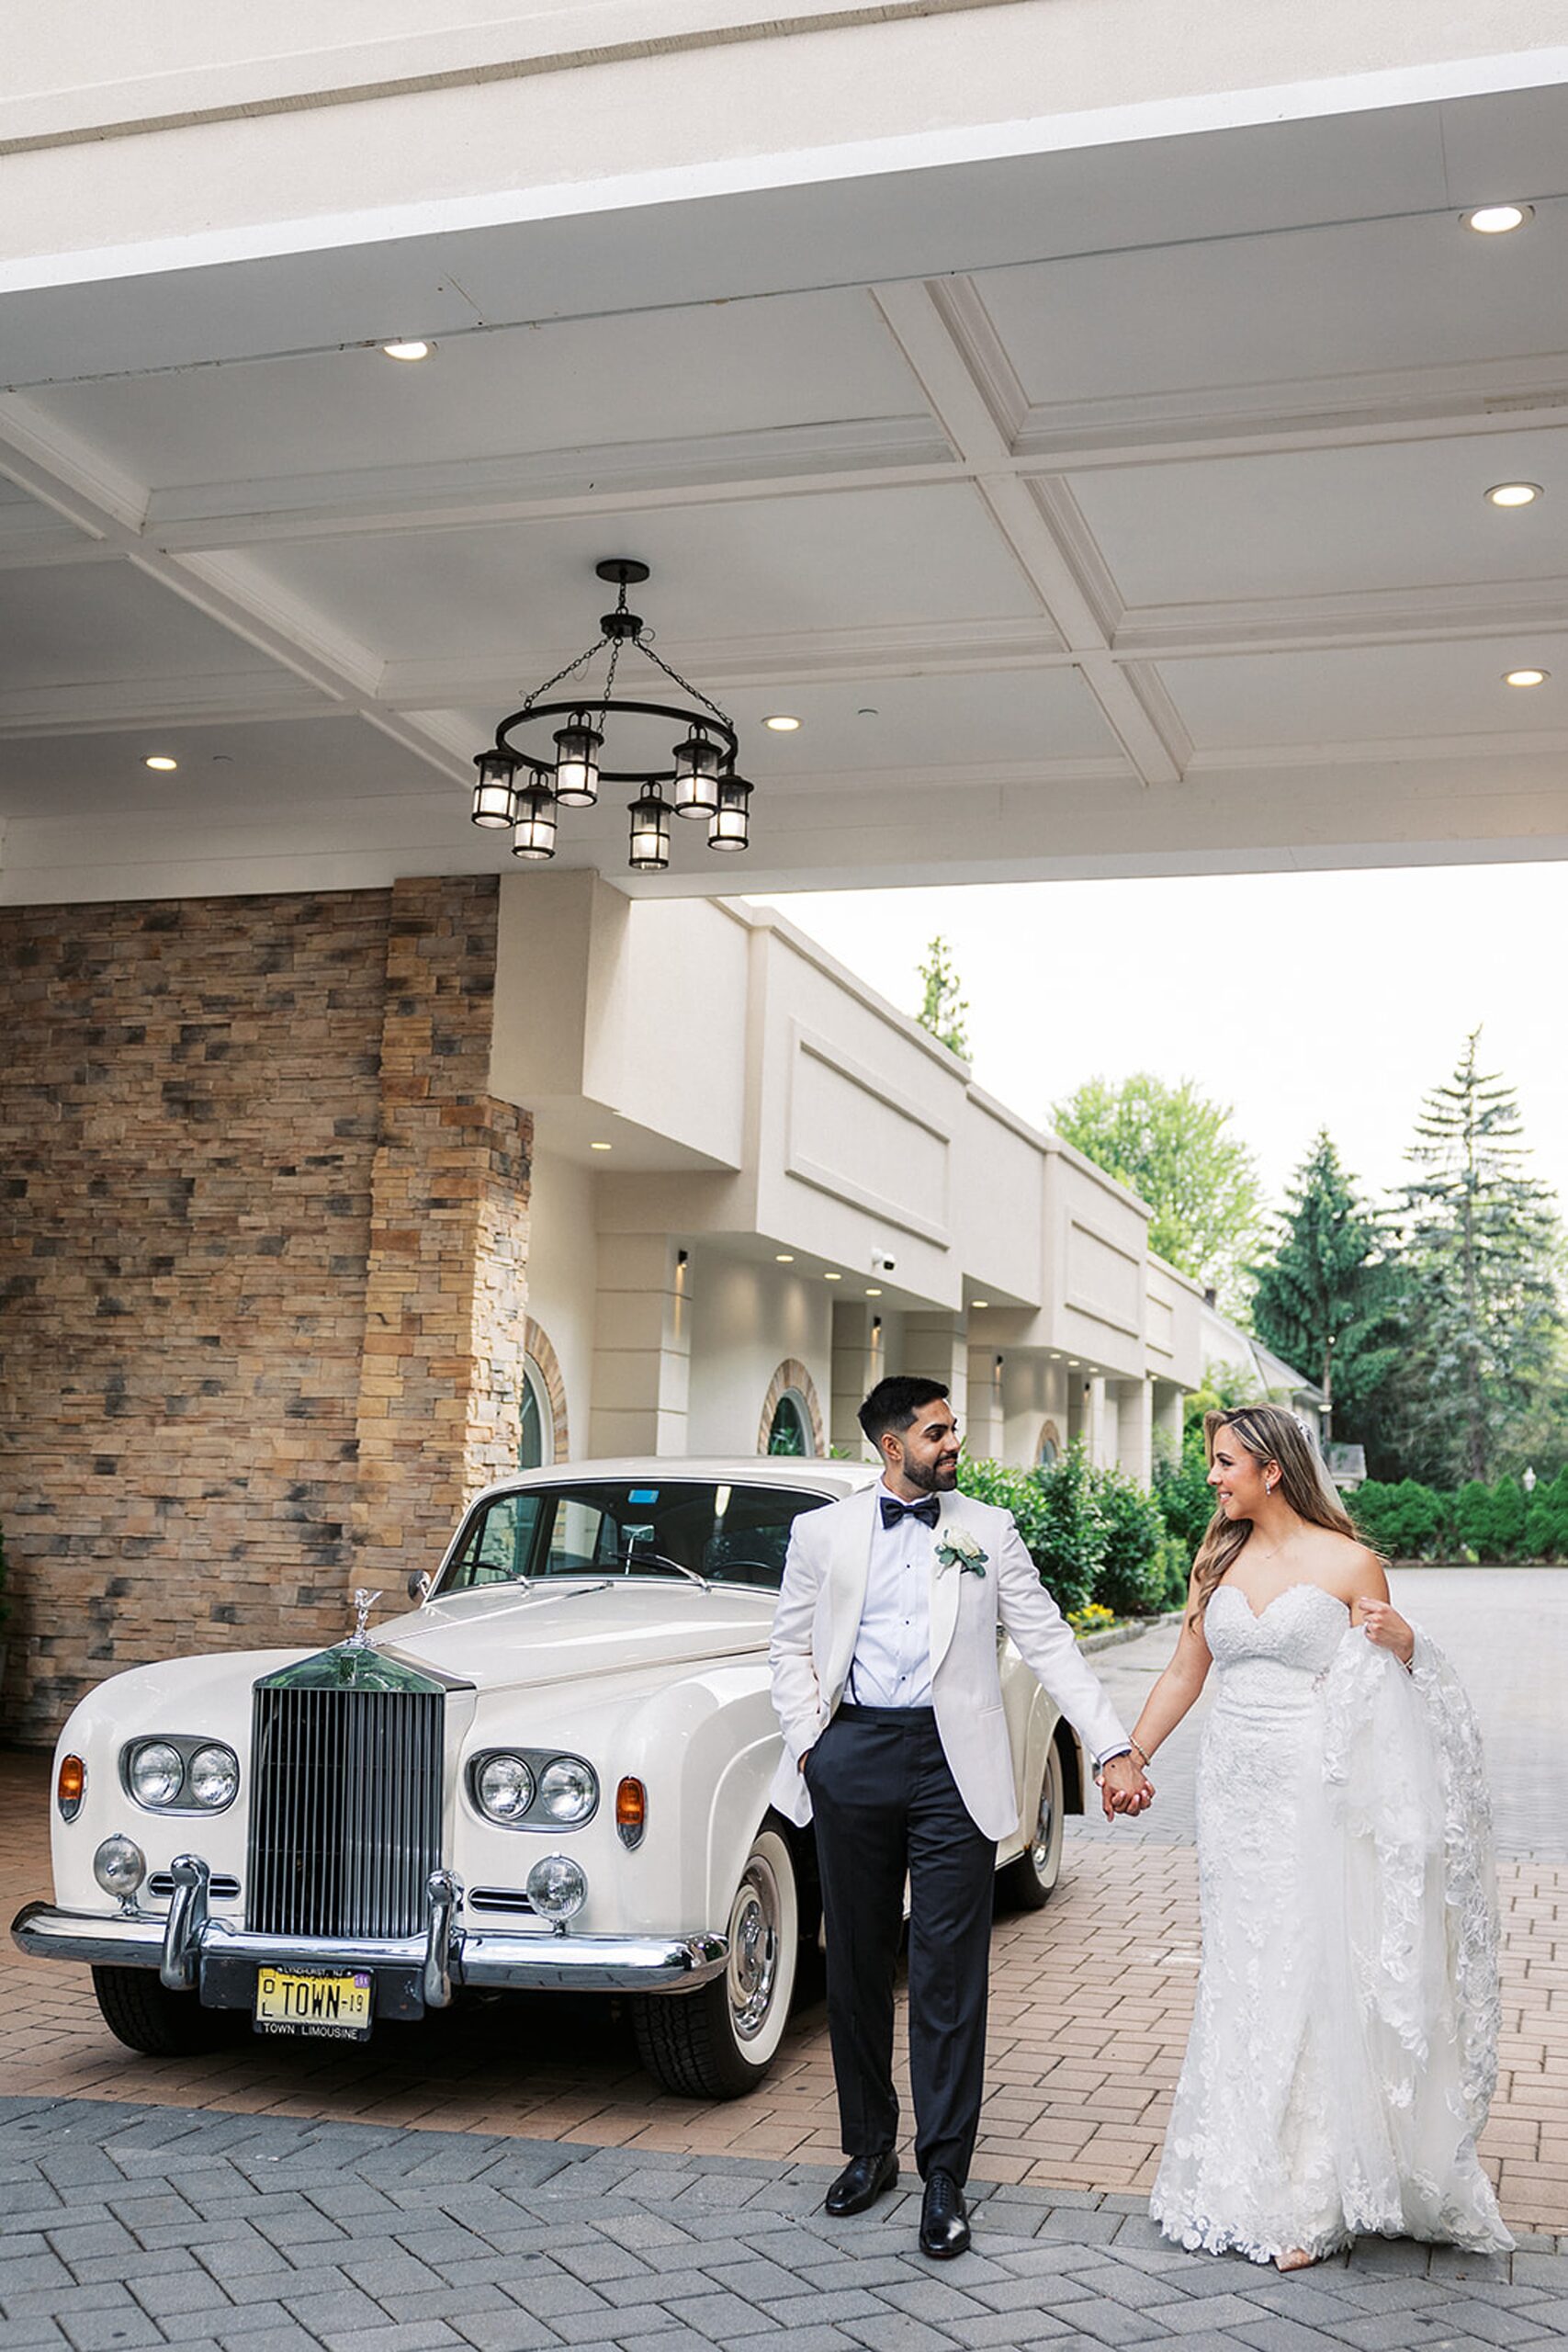 Newlyweds walk hand in hand by an antique limo under a car port at a valley regency wedding